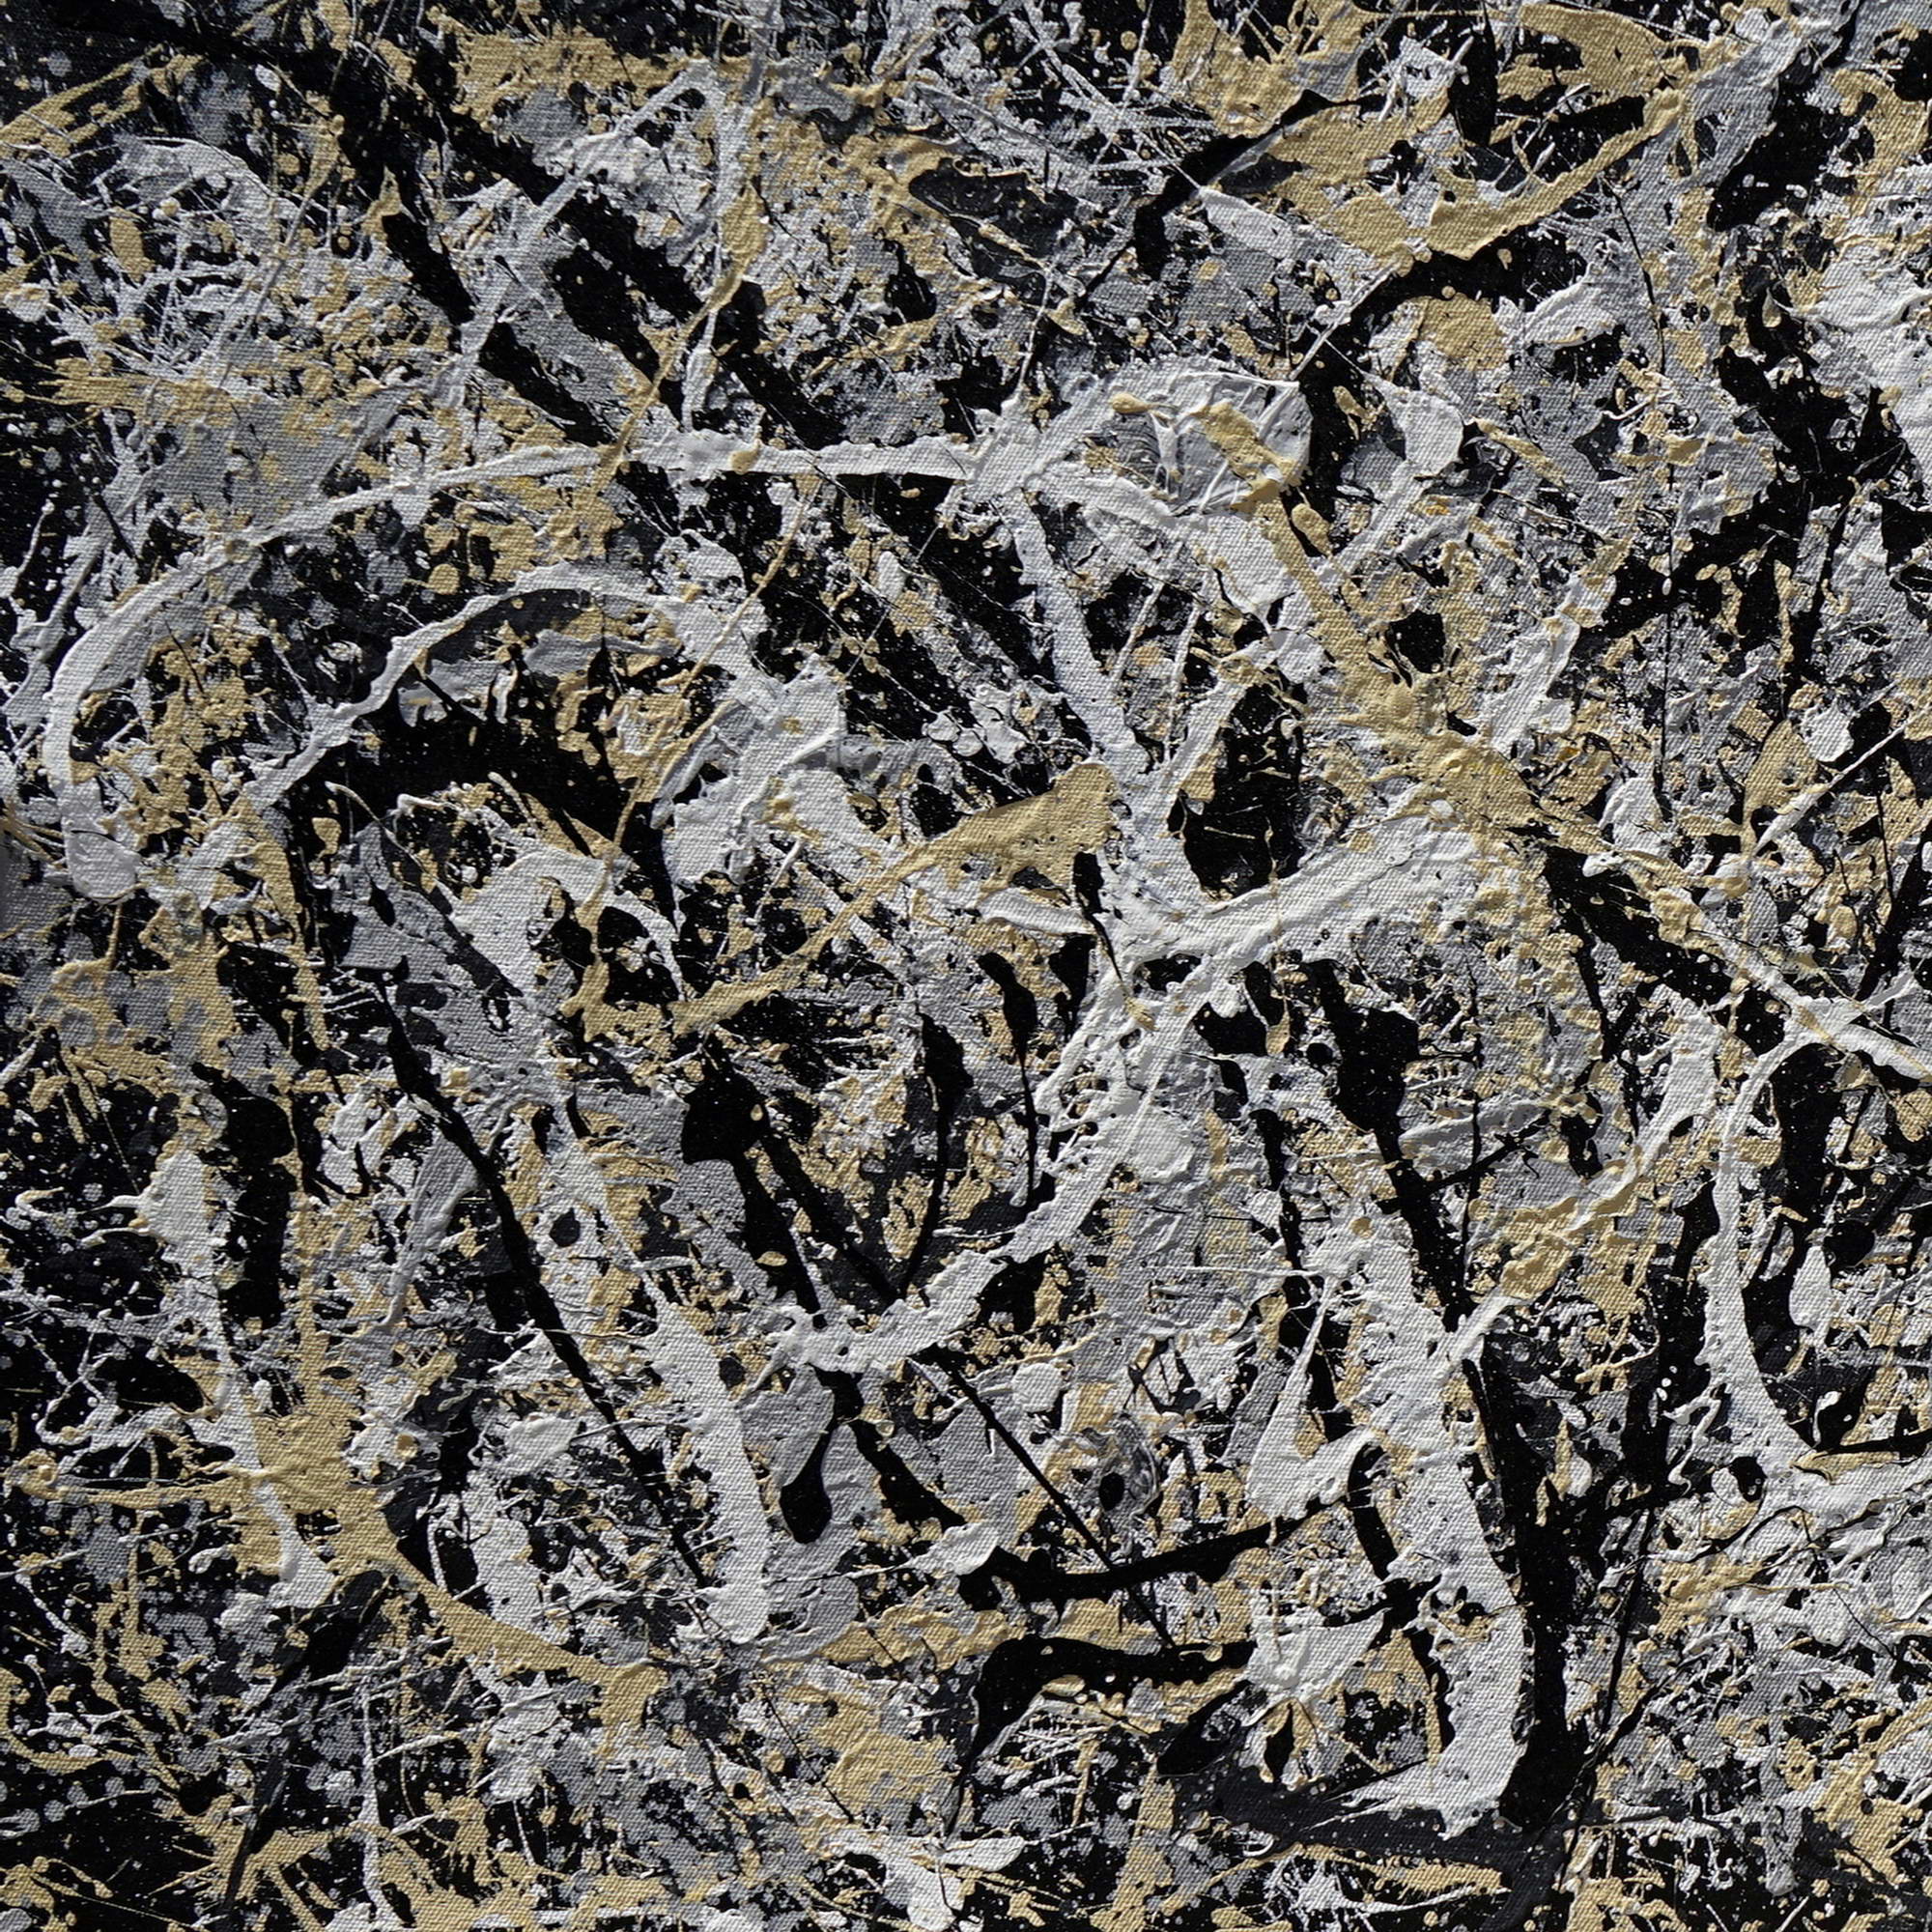 Hand painted Abstract Dynamism Pollock style 75x150cm